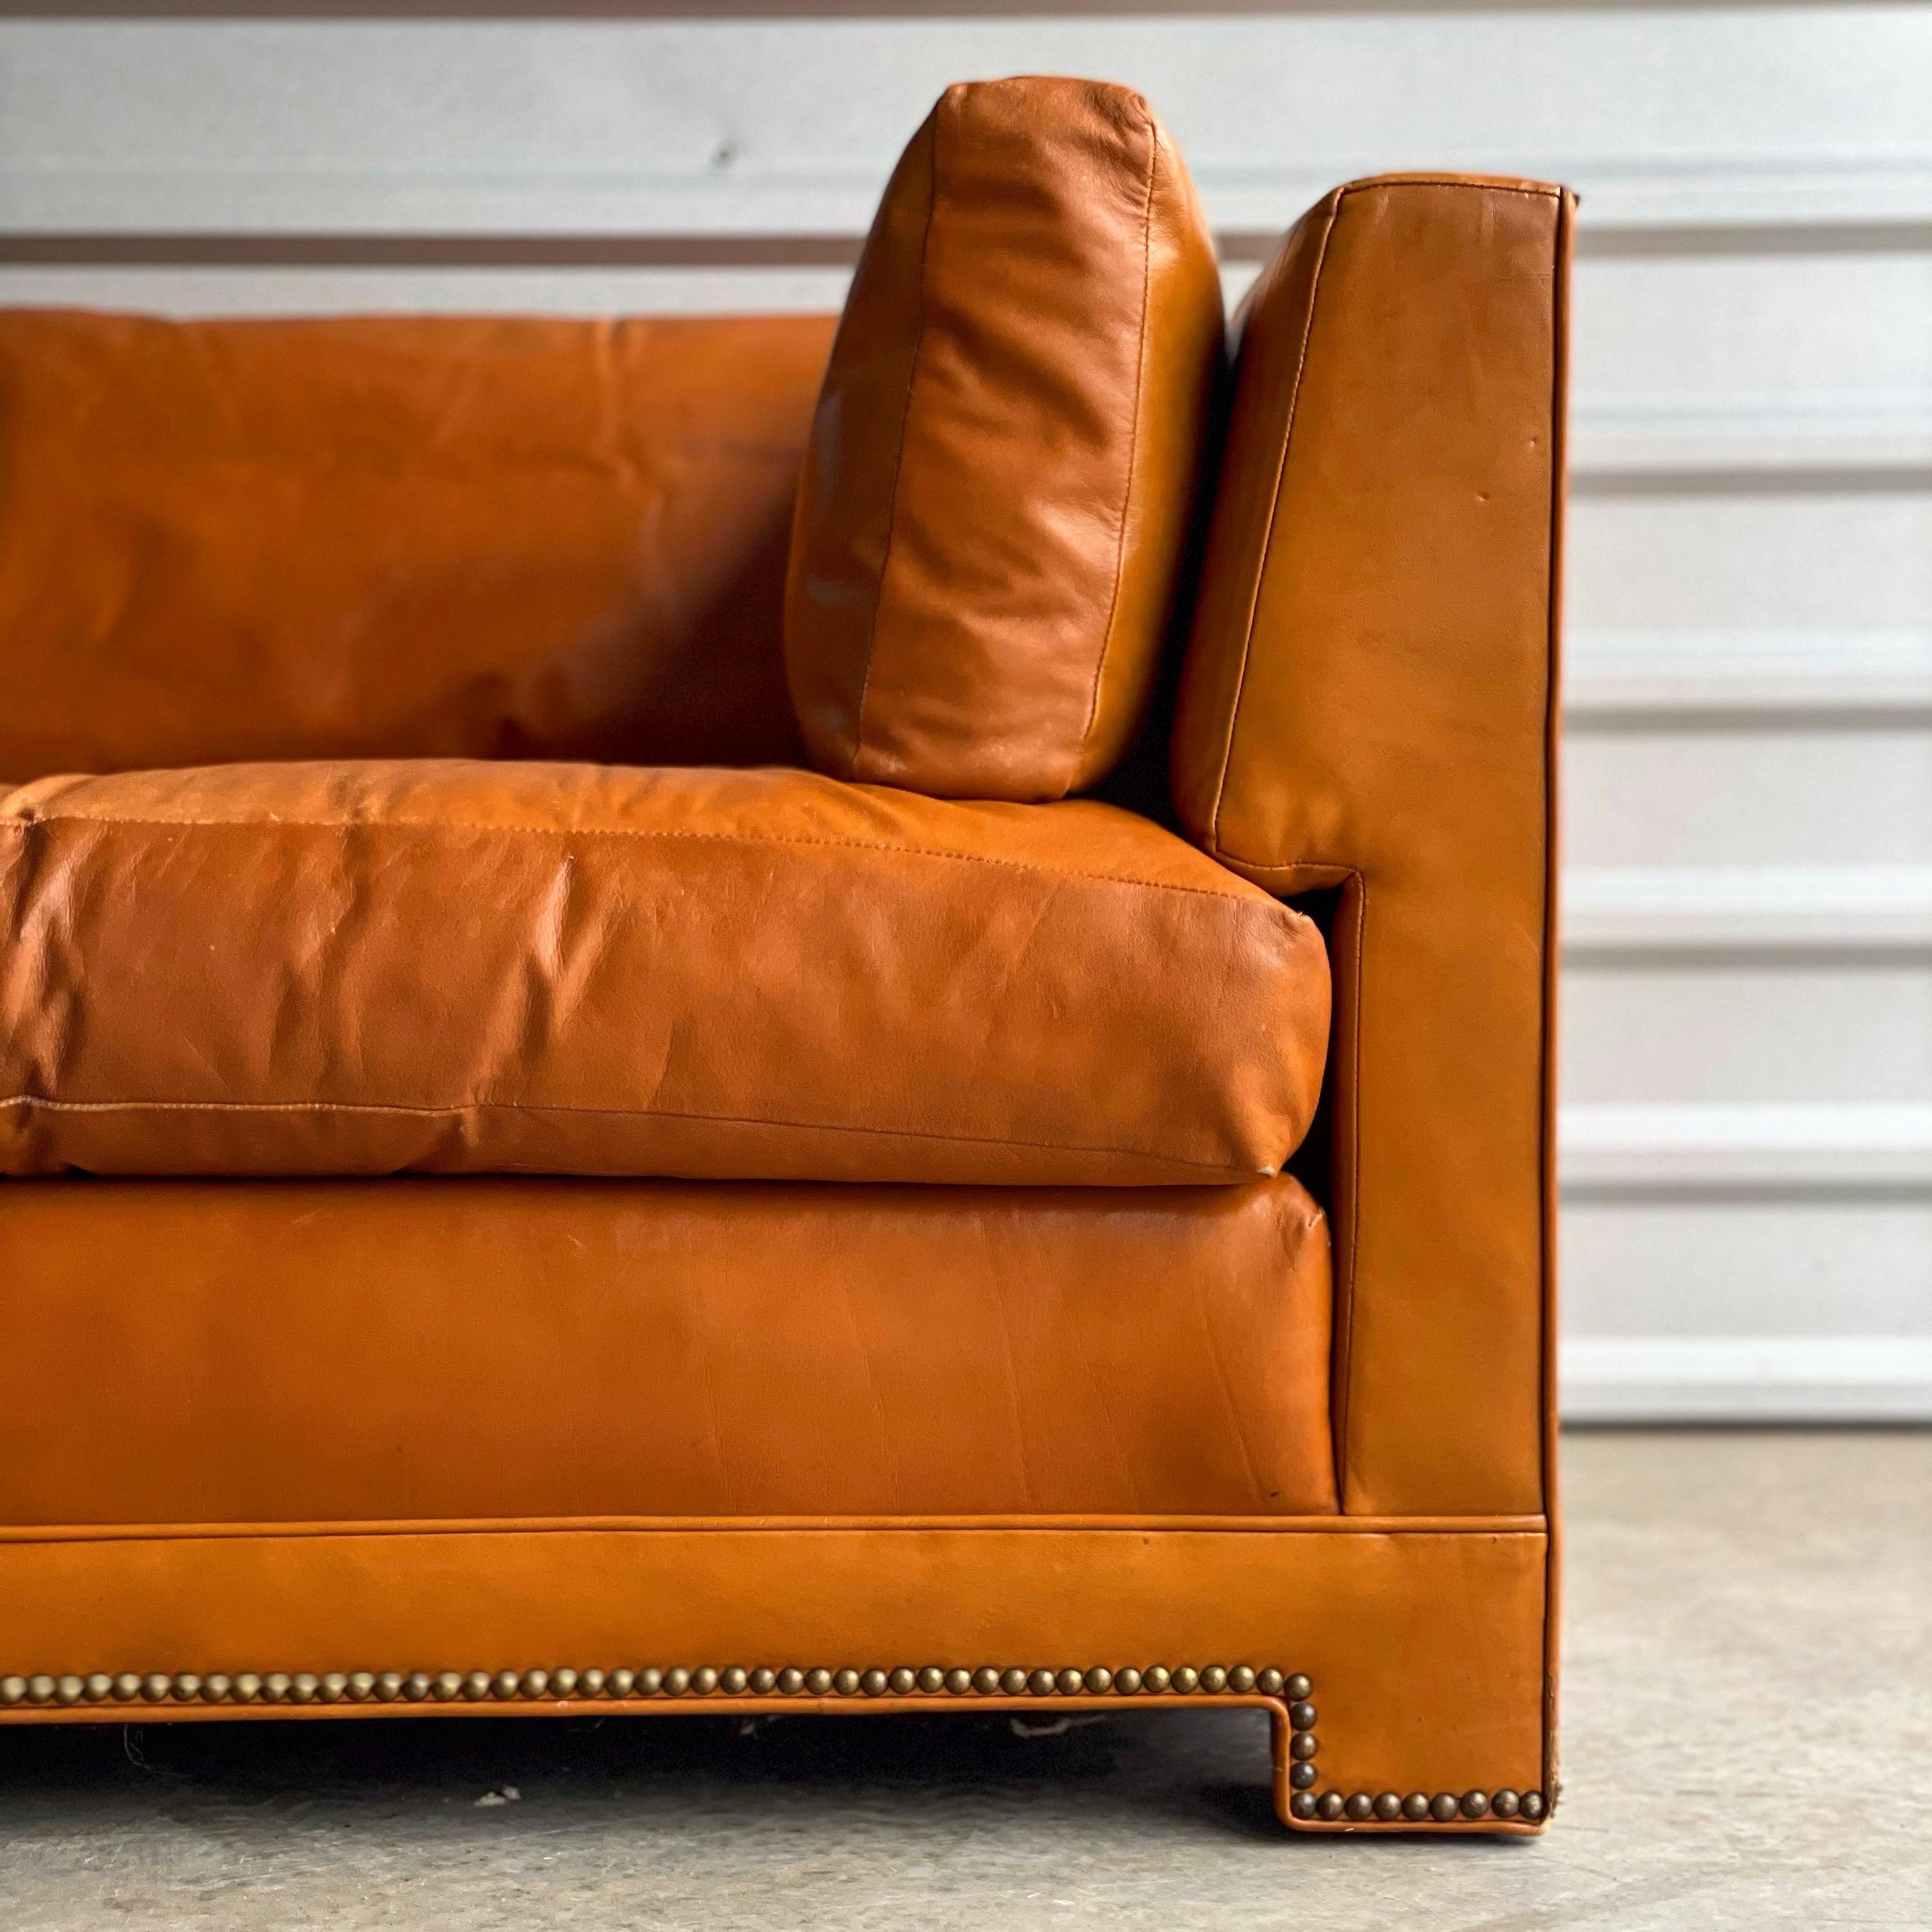 Rare and stunning Parsons style sofa by John Widdicomb. Built to stand the test of time, Widdicomb spared no expense on materials and craftsmanship. Goose down filled cushions, all original cognac tone leather and brass nail head detail. Leather is